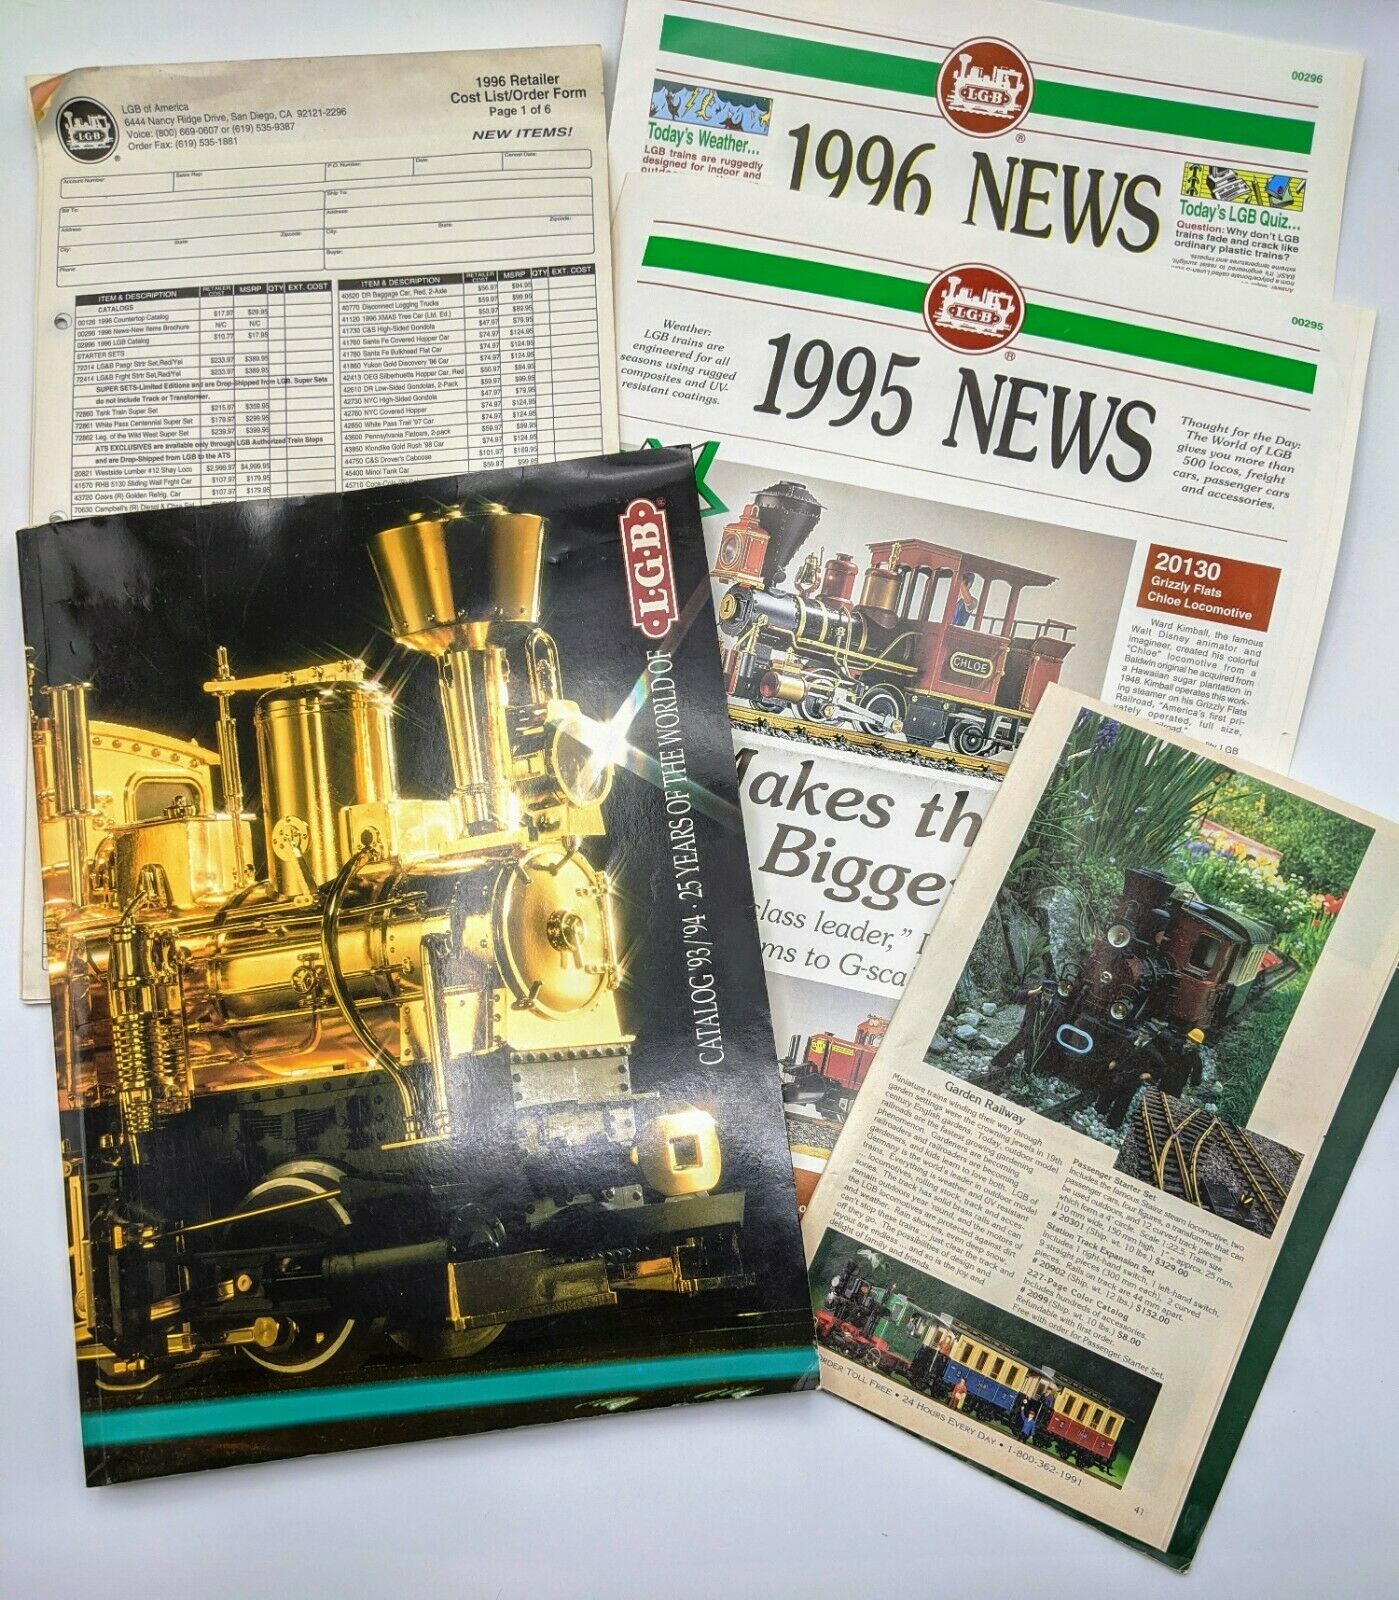 1993/94 Lgb Catalog  25 Years Of The World Of Lgb & 2 Newsletters, Order Forms